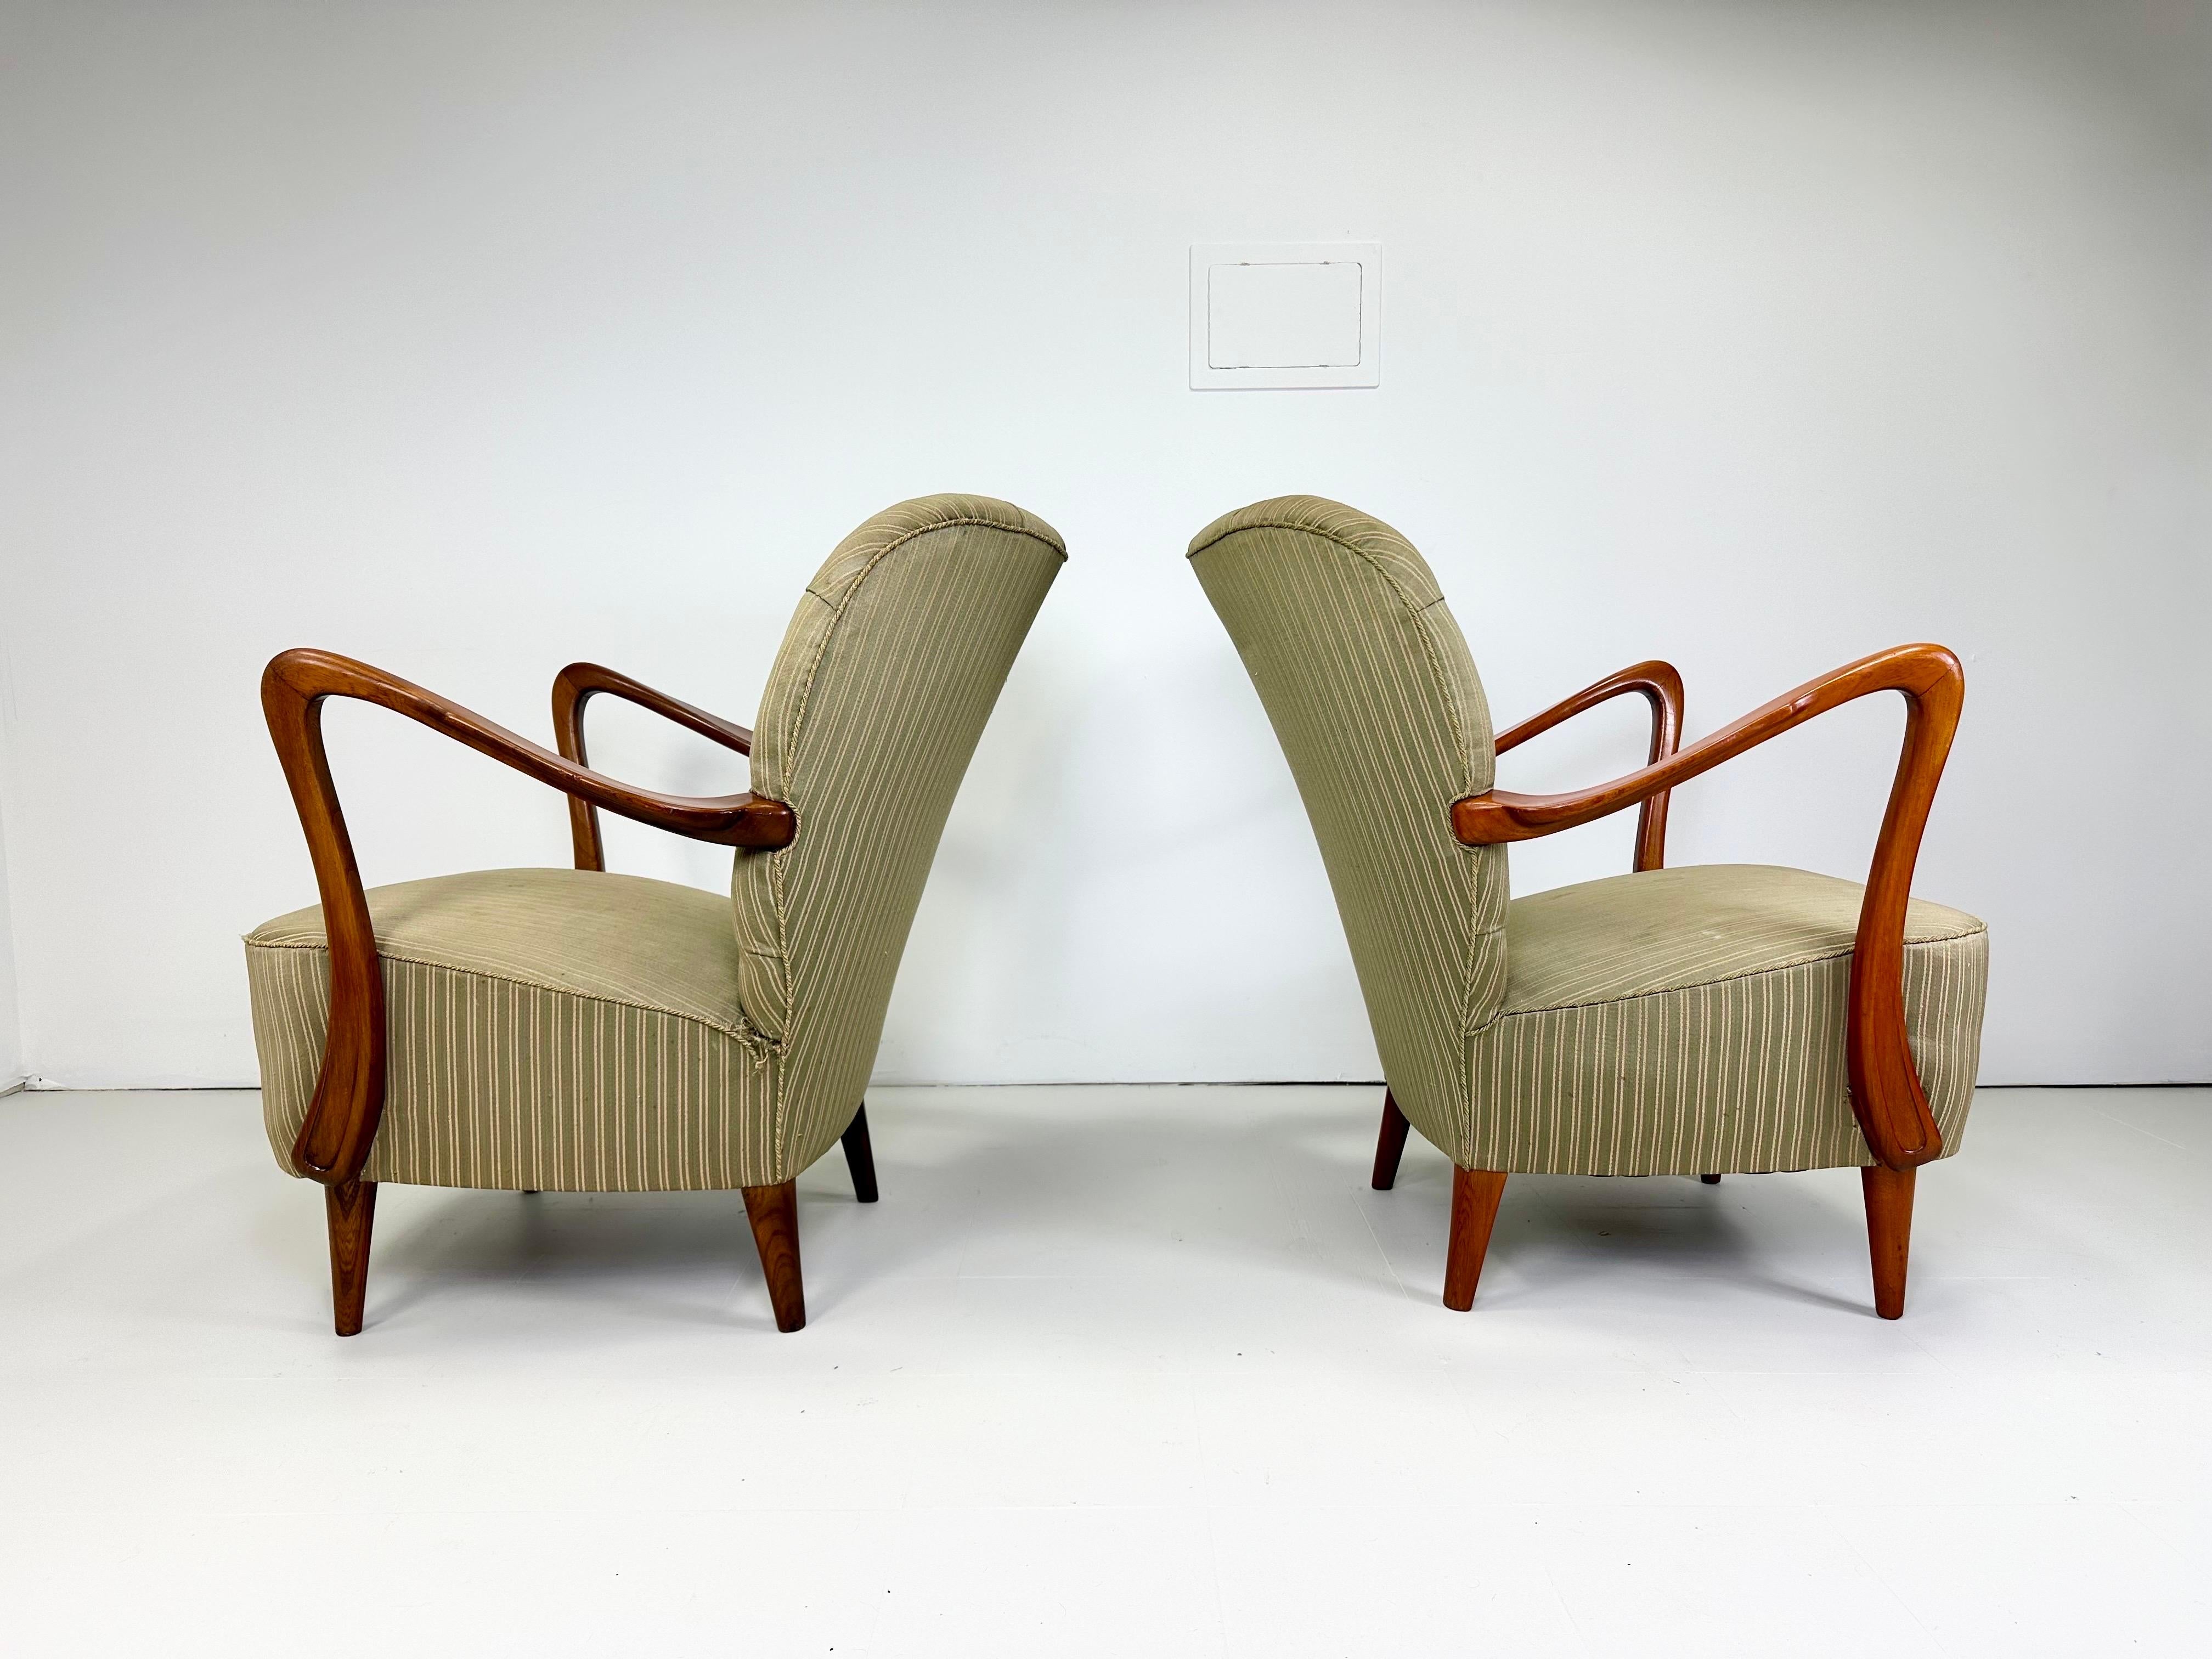 Pair of 1940’s Swedish Lounge chairs. We love the sculptural dramatic wood arms on these chairs. Button tufted upholstery. Sweden,

Delivery to NYC area available for $450. Please inquire 